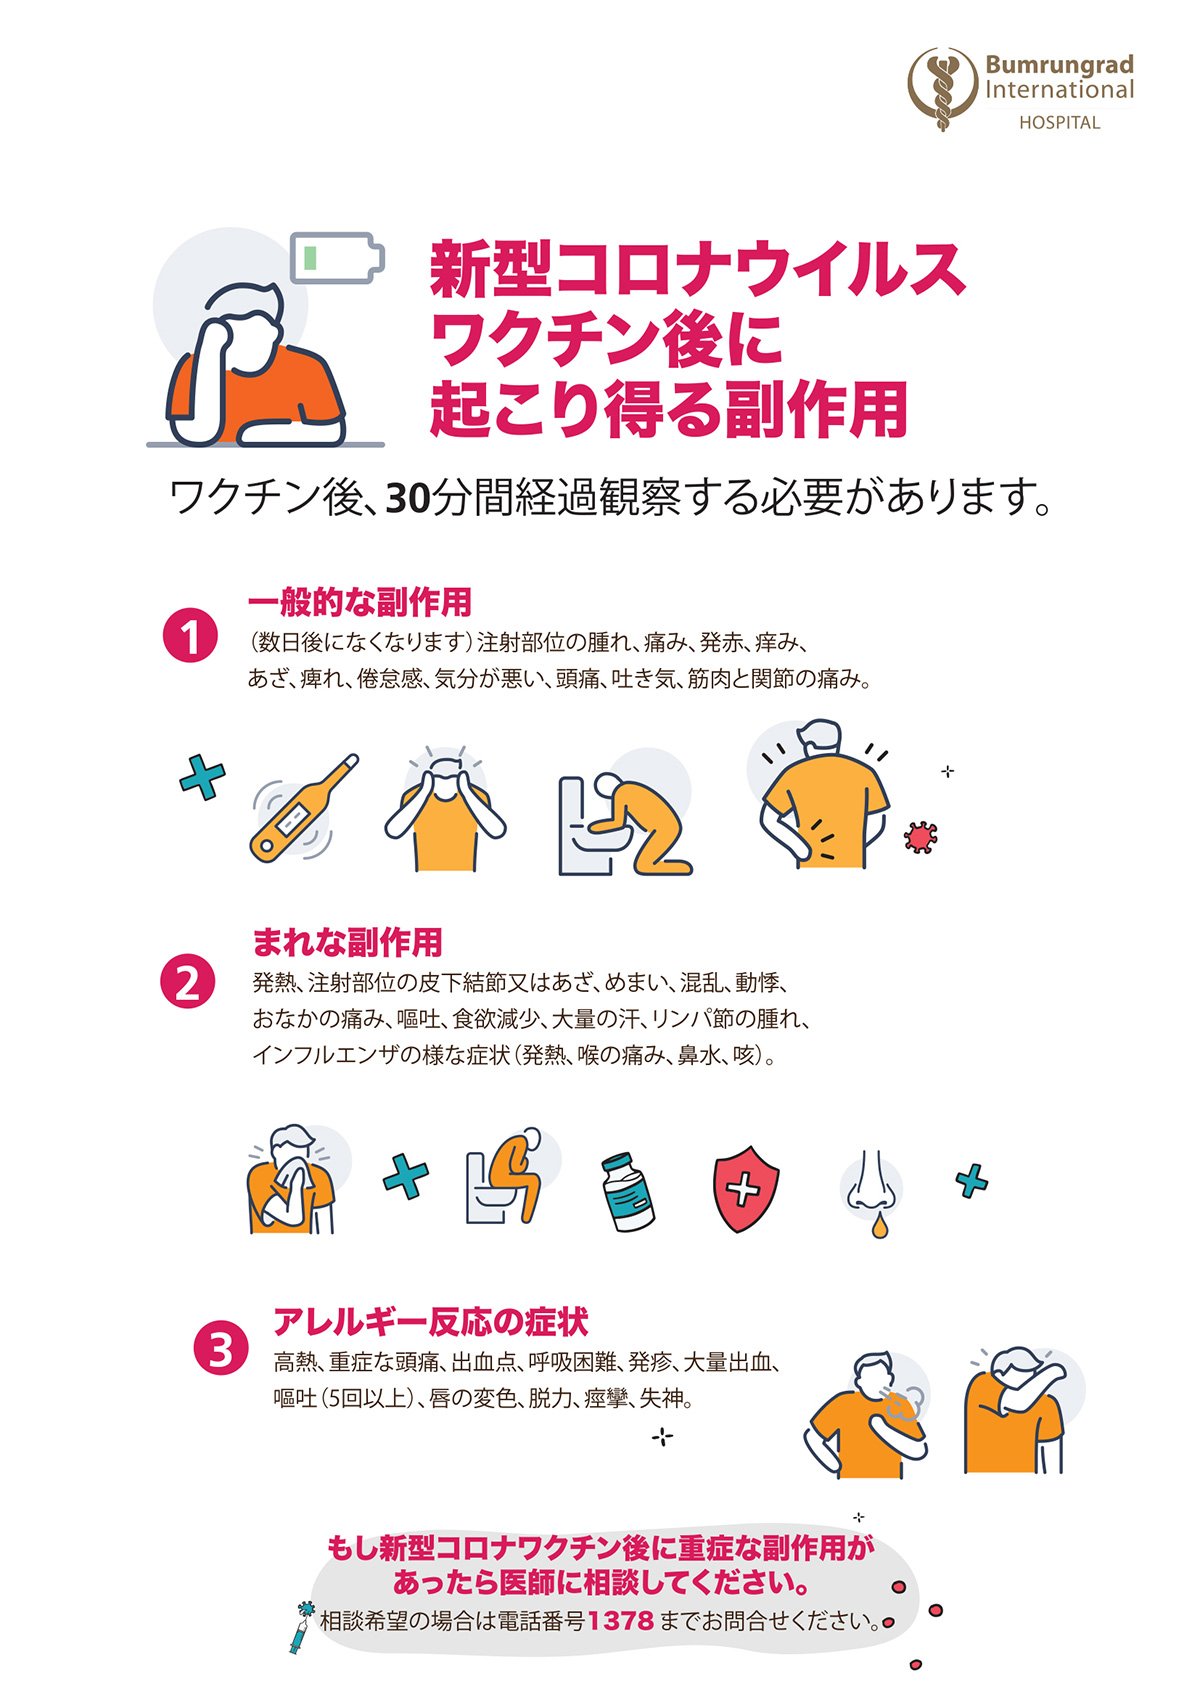 Getting-Your-Covid-19-Vaccination-info_JP-04.jpg